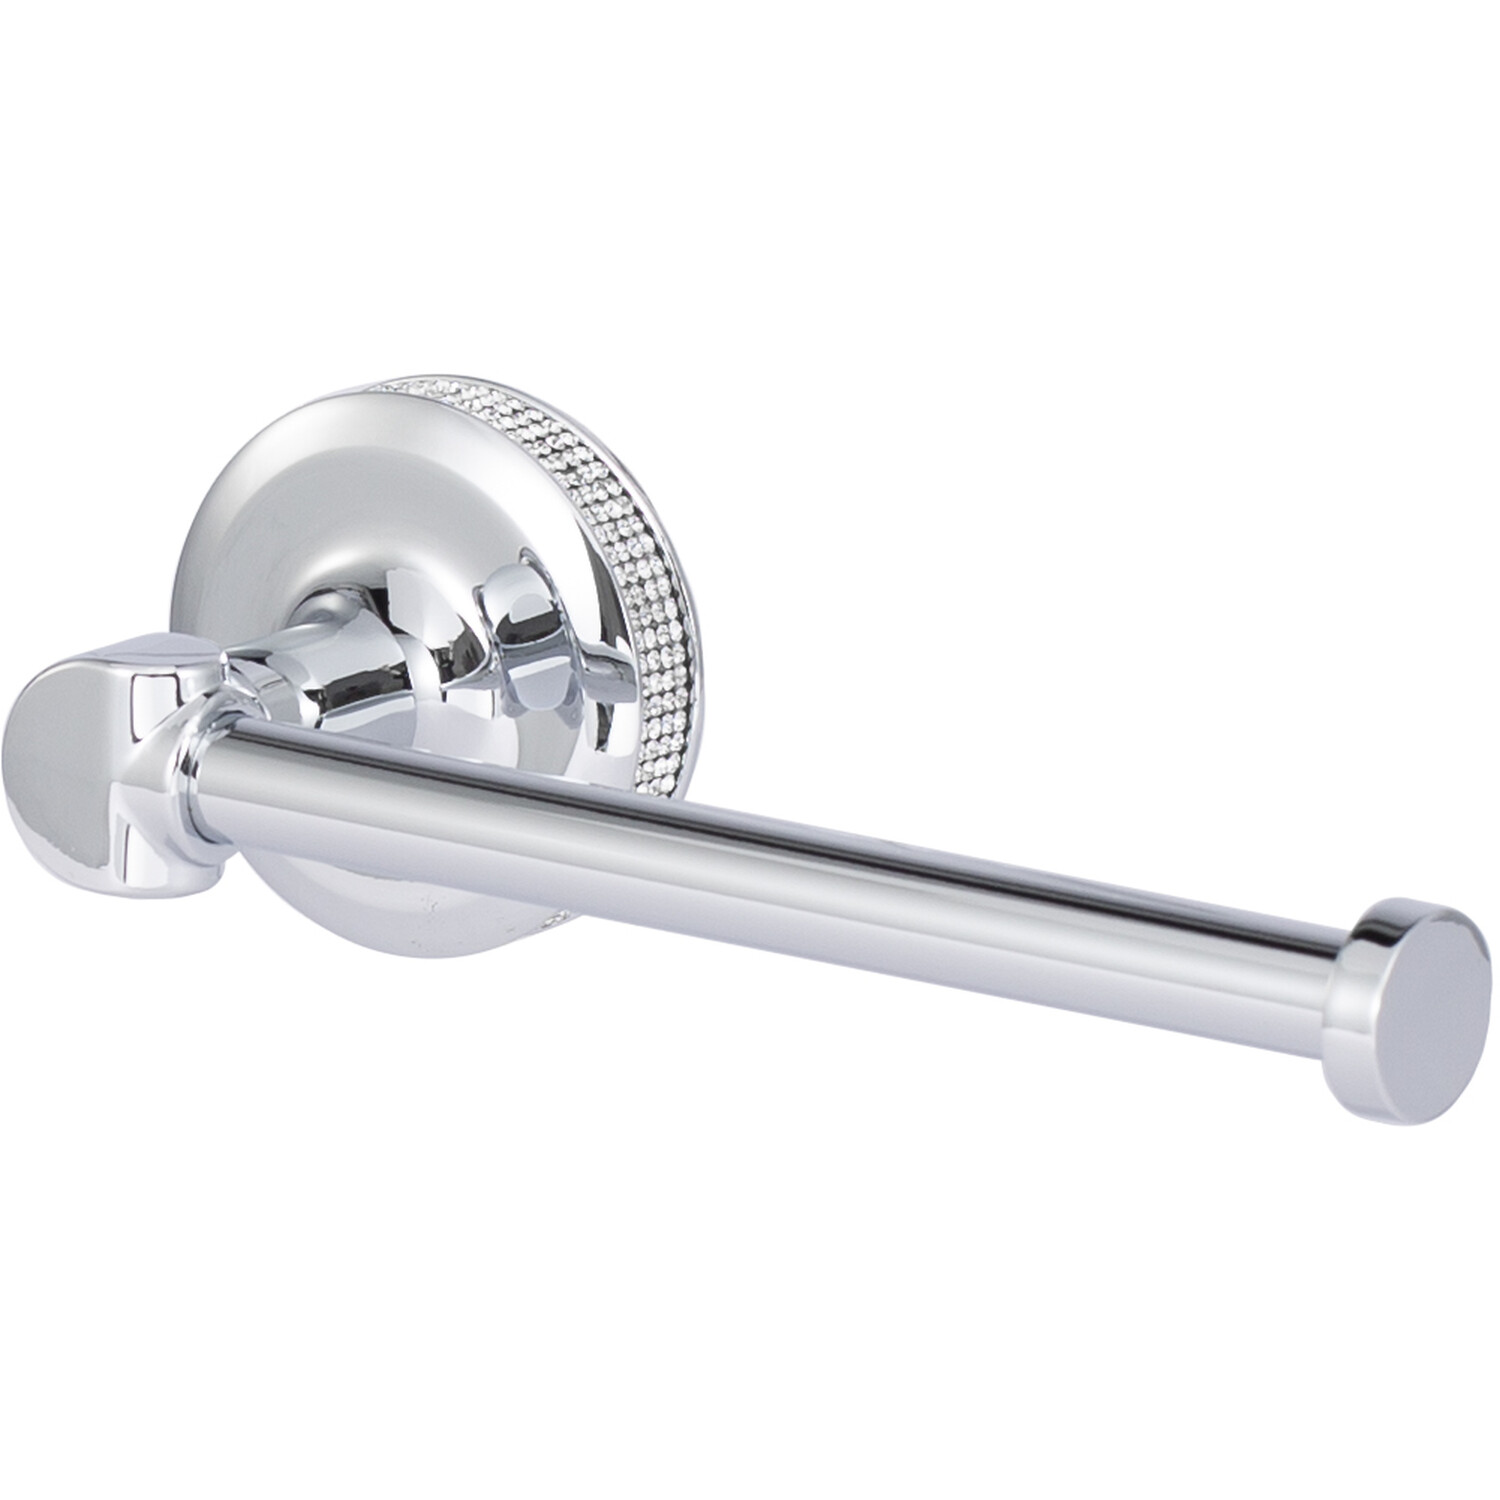 Victoria Silver Toilet Roll Holder Image 2